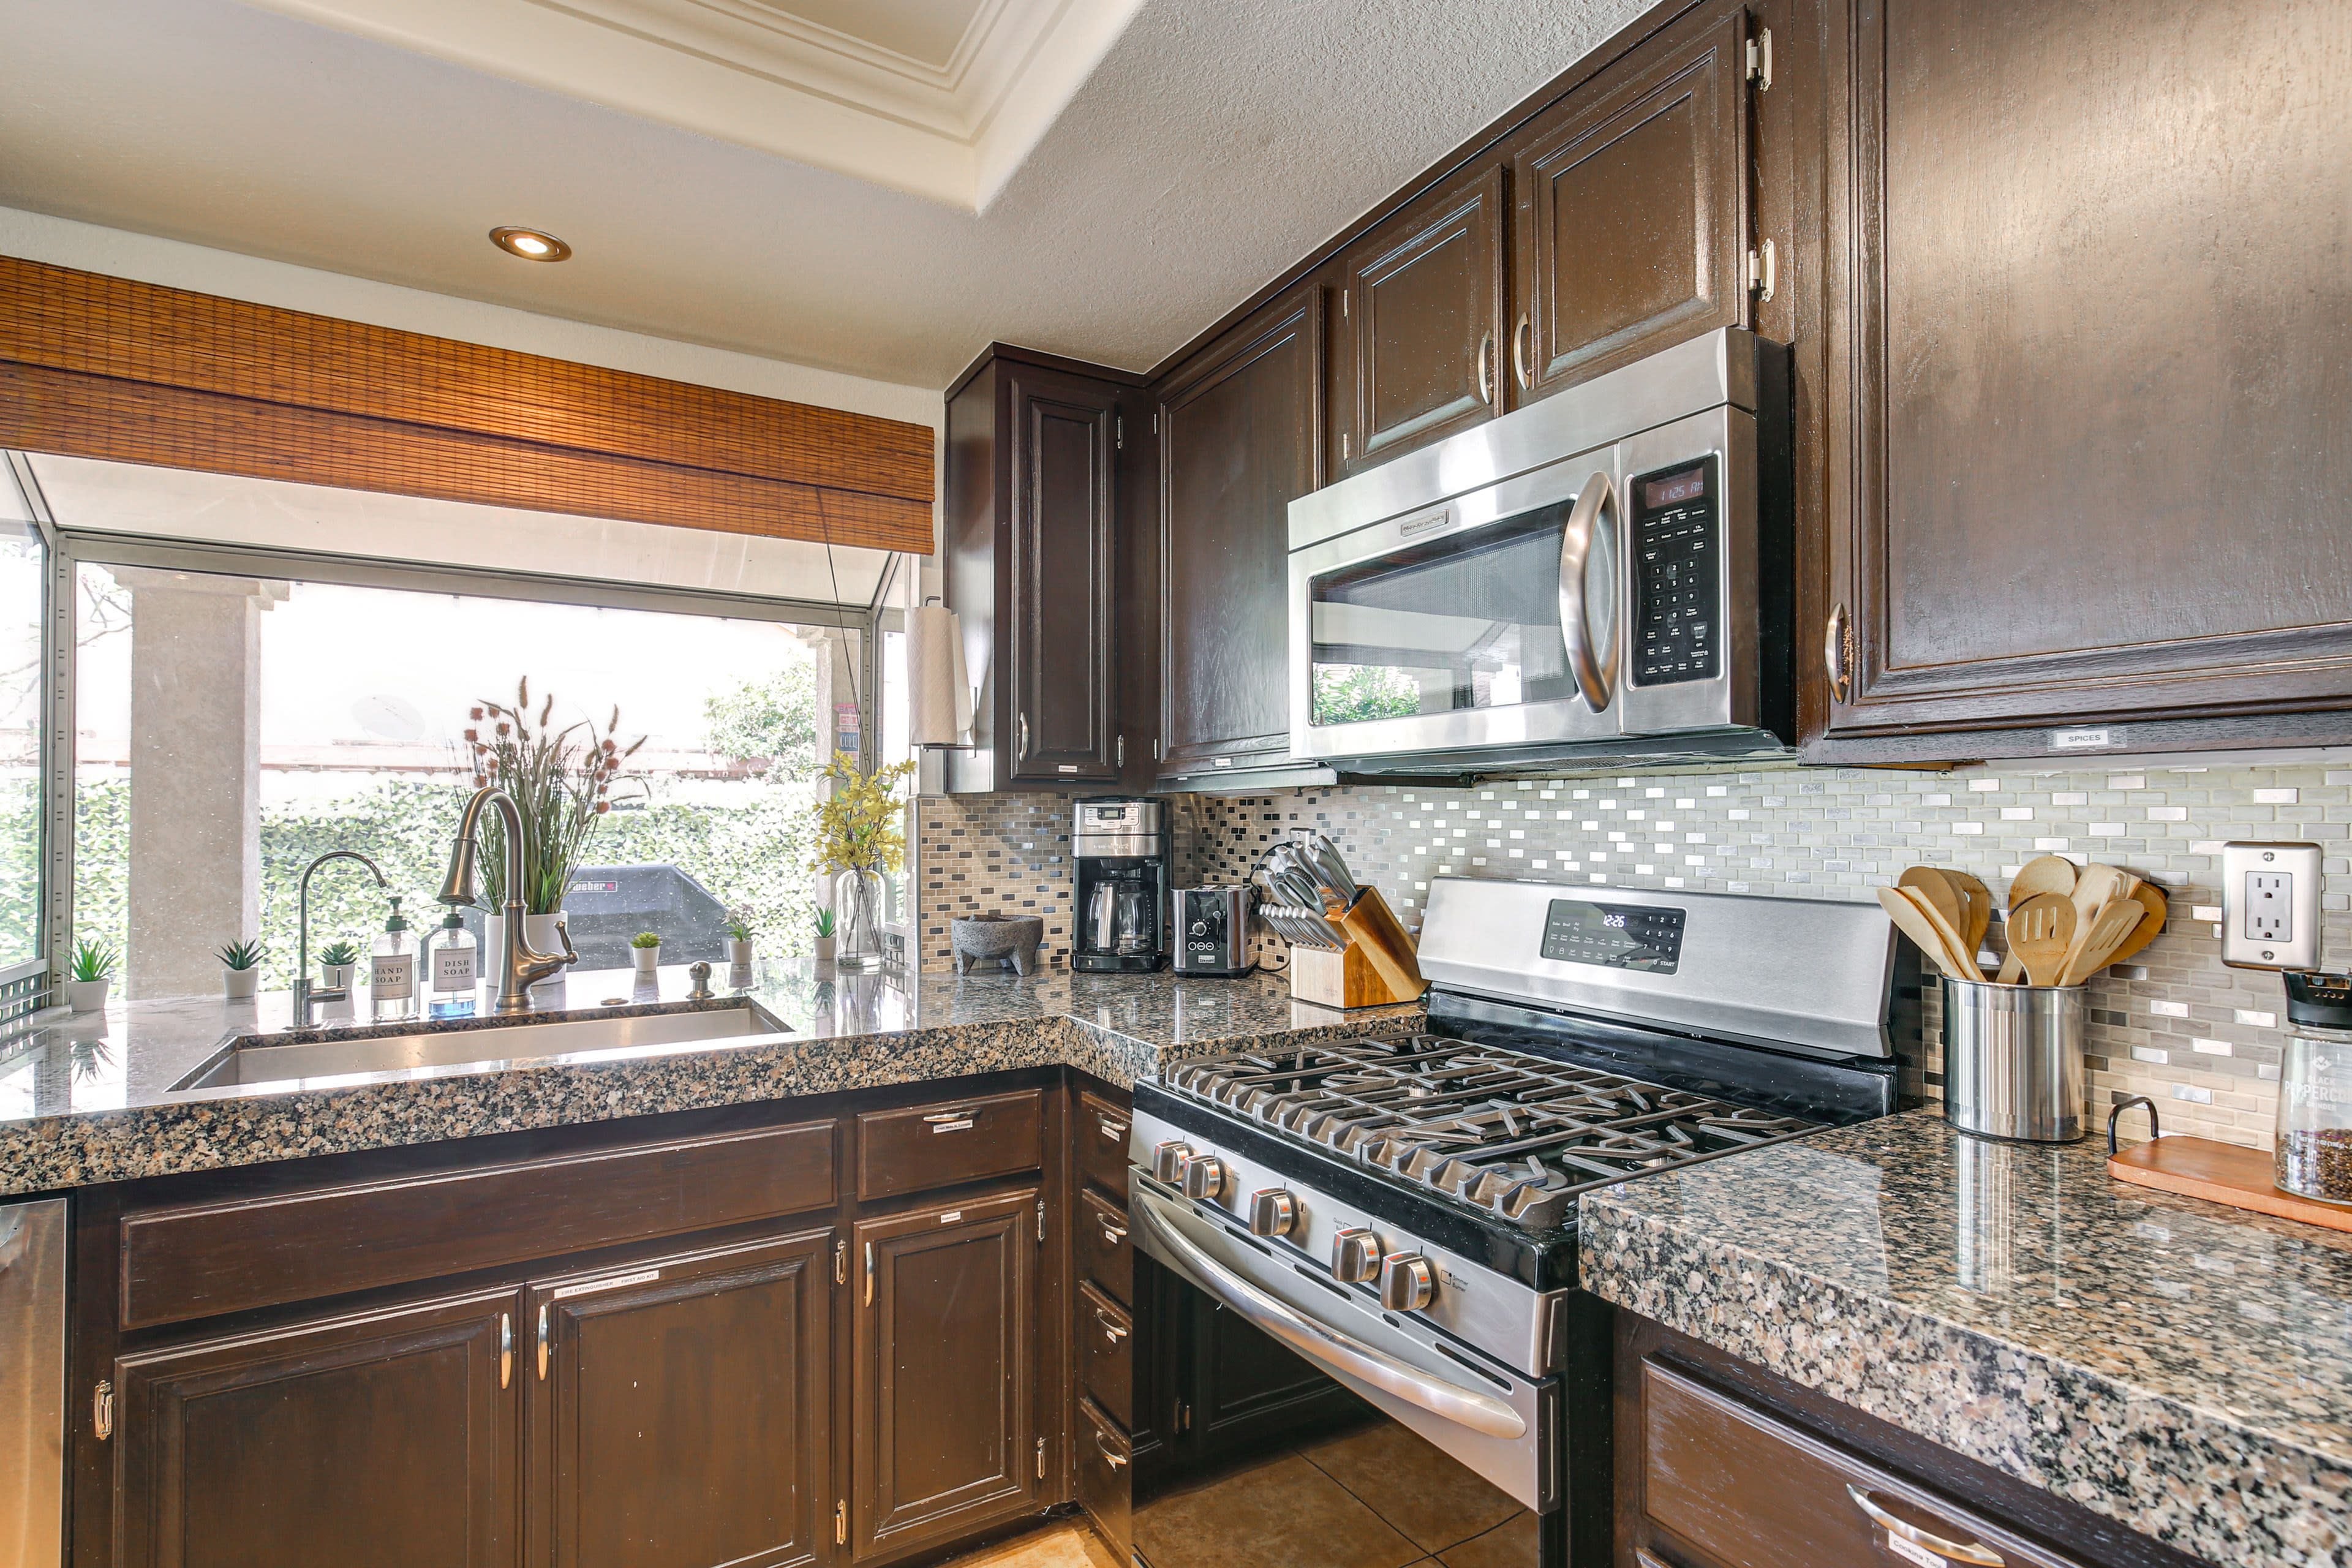 Kitchen | Complimentary Snacks | Fully Equipped